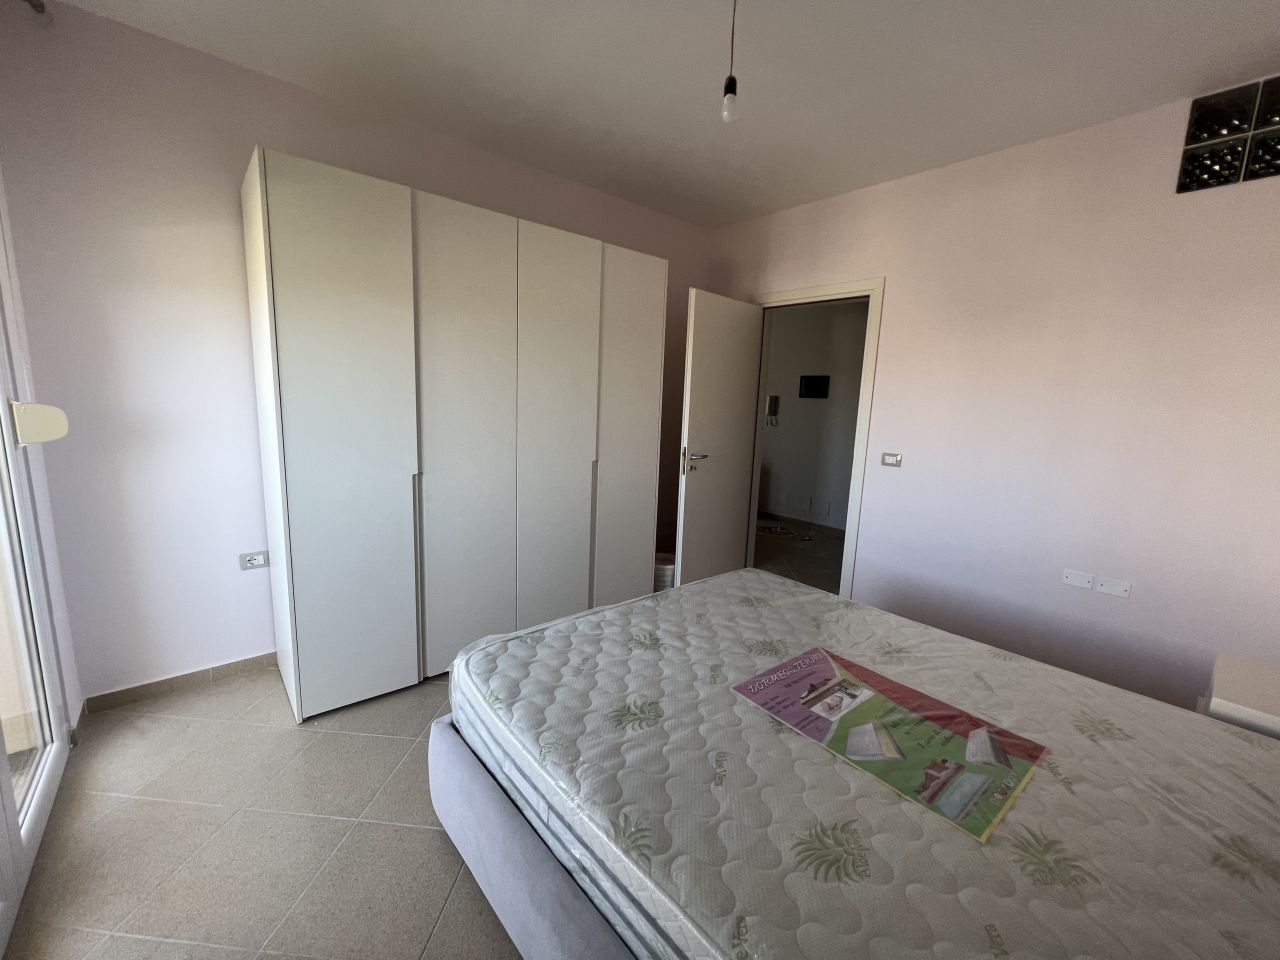 Two Bedroom Apartment For Sale In Vlore Albania 